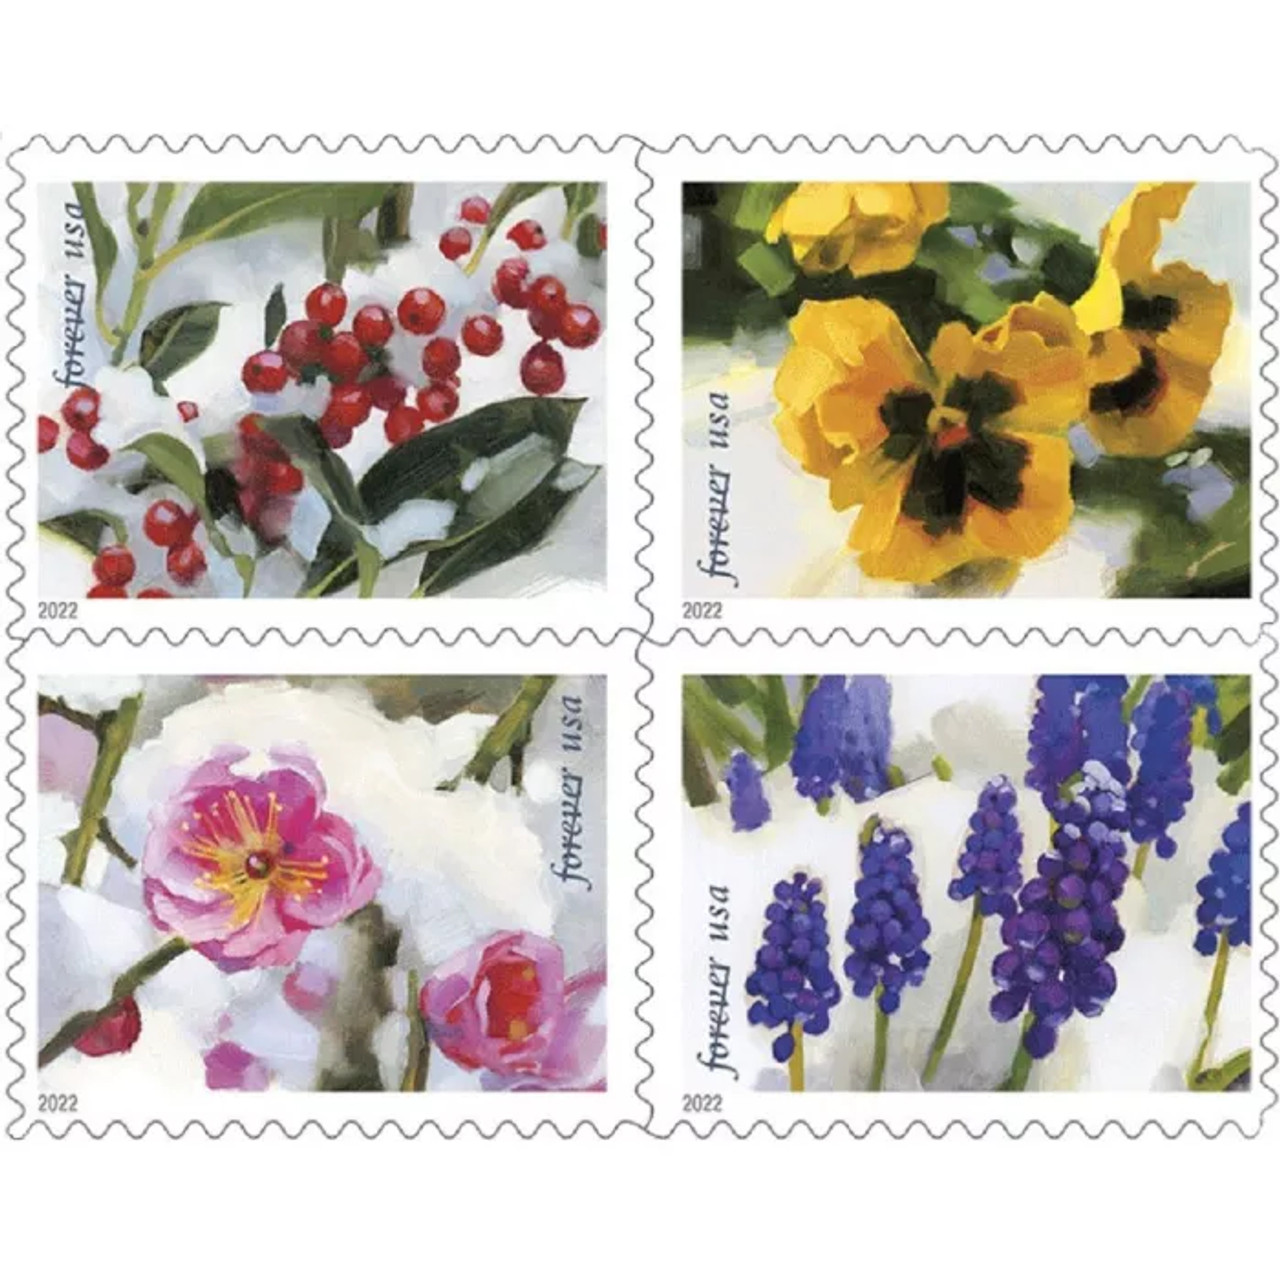 2022 us mountain flora forever stamps